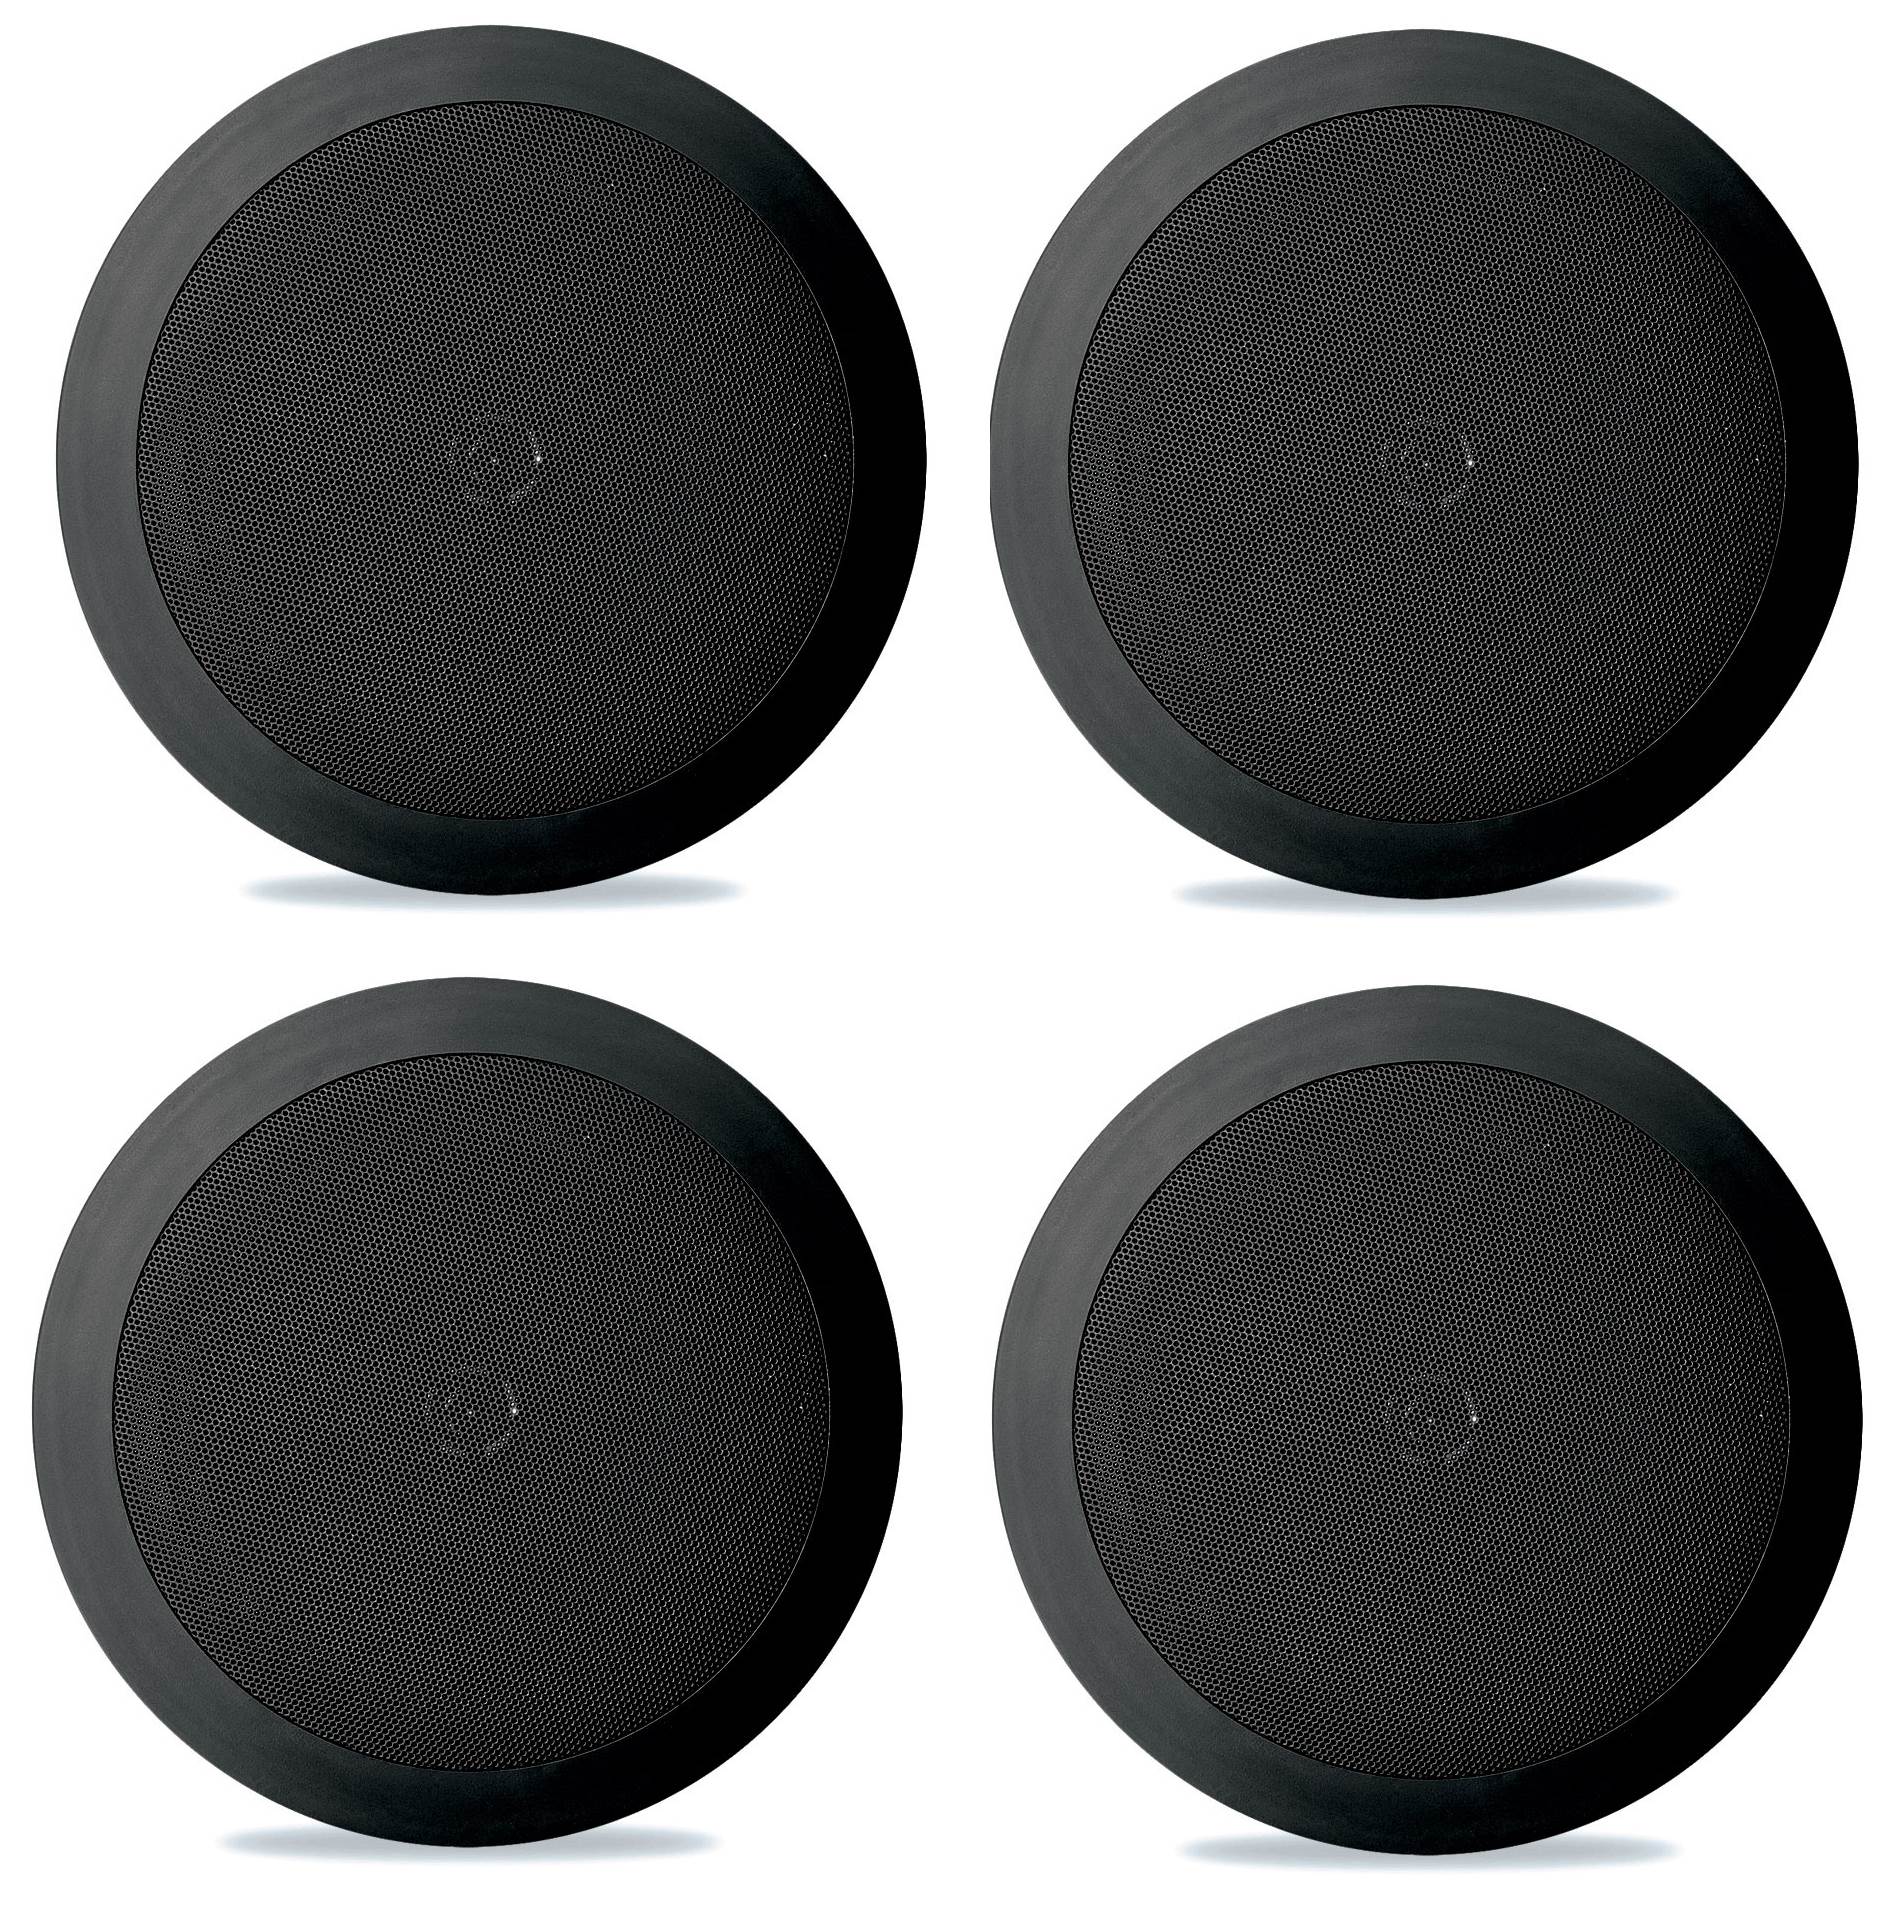 4) NEW Pyle PDIC81RDBK 250W 8 Inch Flush In-Wall In-Ceiling Black Speakers Four - image 1 of 6